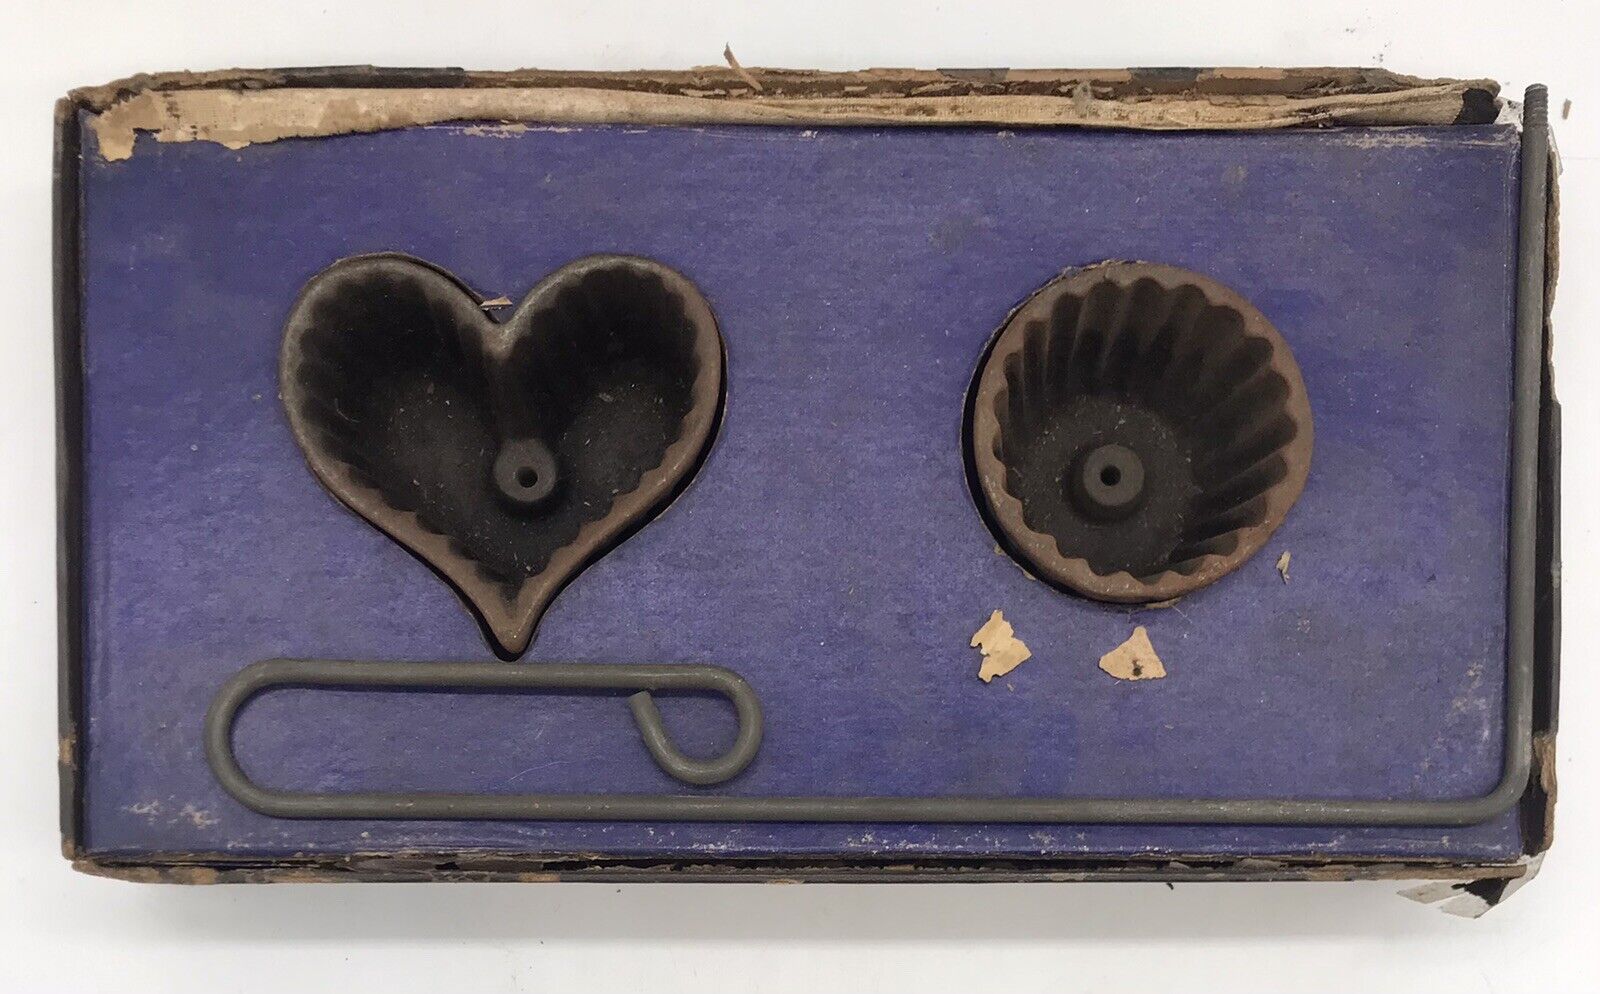 VINTAGE ROSETTE PATTY IRONS BY ALFRED ANDRESEN.HEART SHAPED.ORIGINAL BOX.